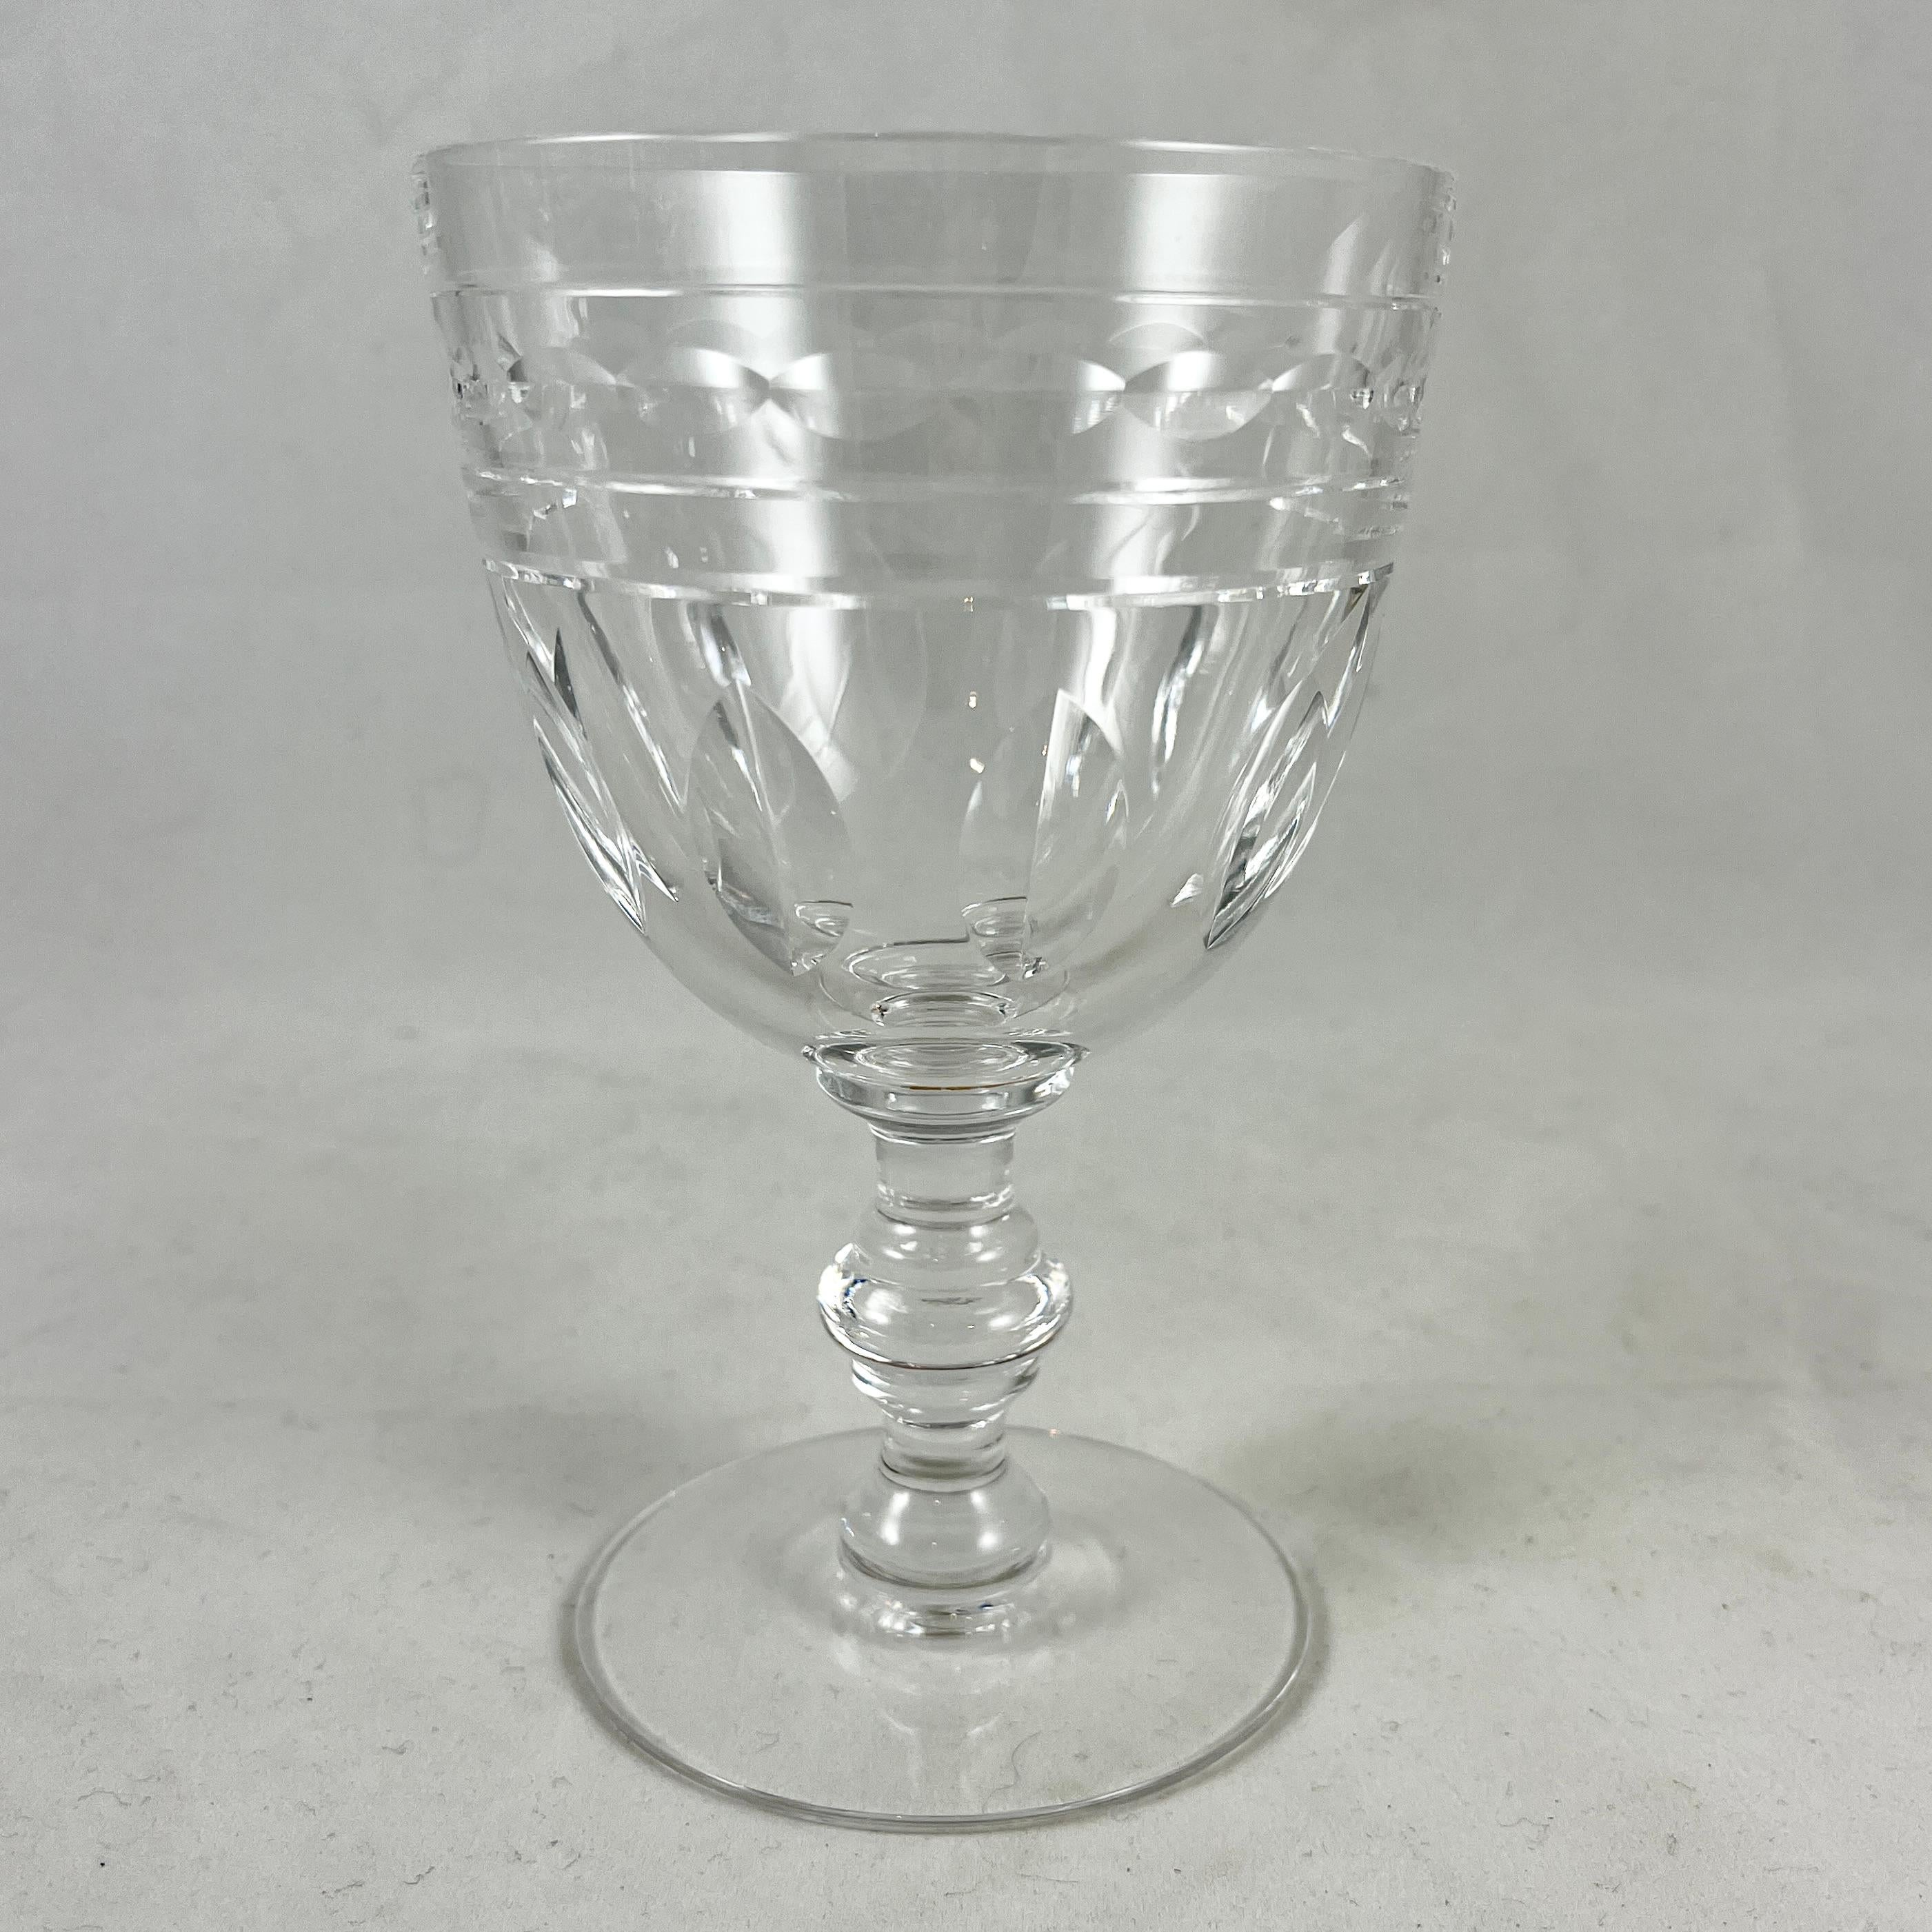 A set of eight crystal goblets in the Kent York pattern, from Val Saint Lambert, Belgium, circa 1956-1962.
Val Saint Lambert is a Belgian crystal glassware manufacturer, founded in 1826 and based in Seraing. It has the royal warrant of King Albert